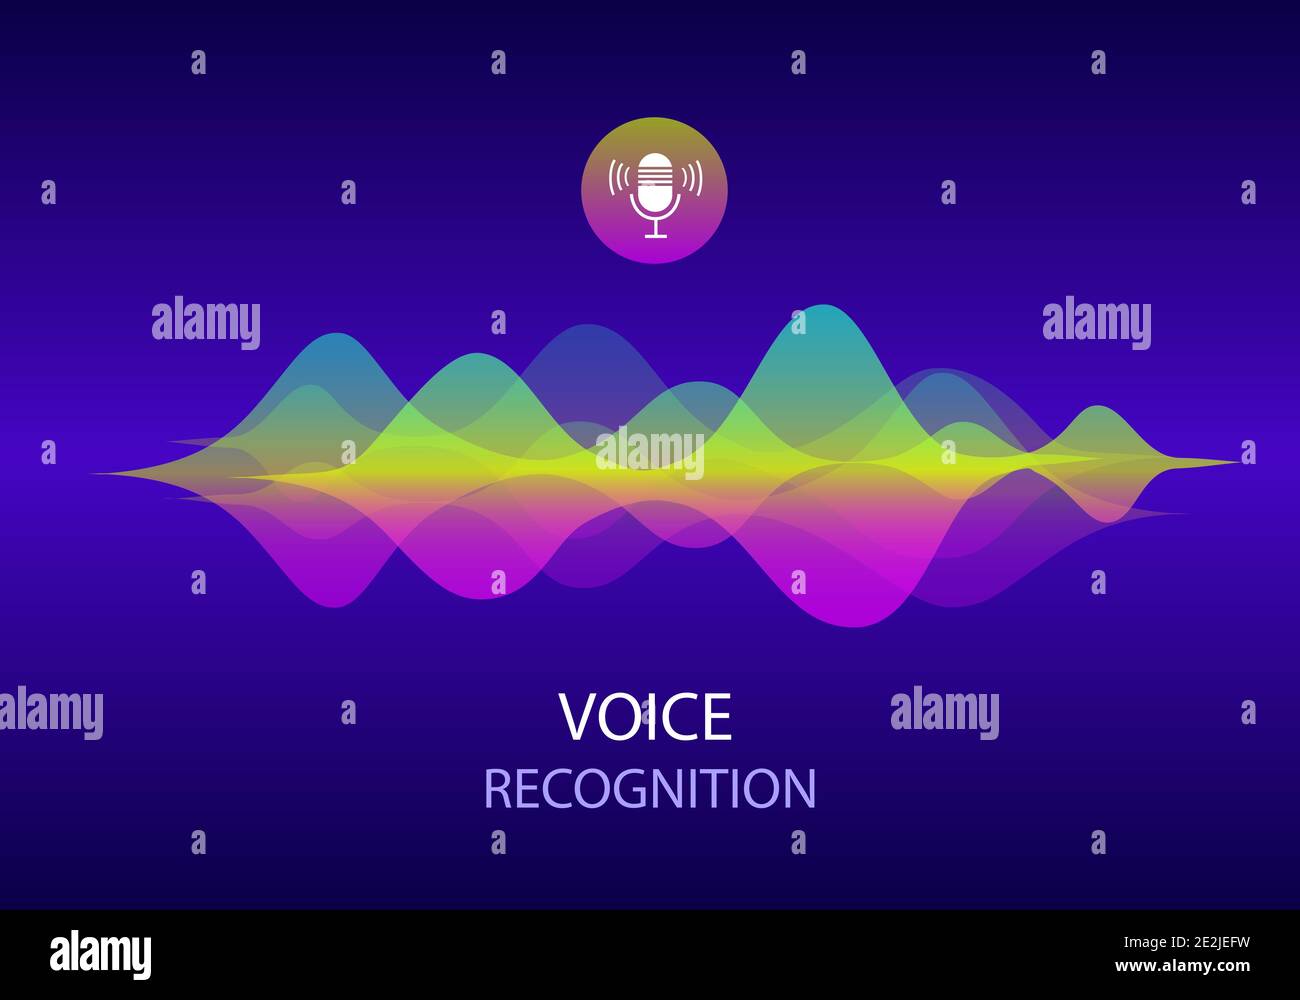 Voice Recognition and Personal Assistant Concept. Illustration of Gradient Vector sound wave and Microphone with bright voice button control. Voice im Stock Vector